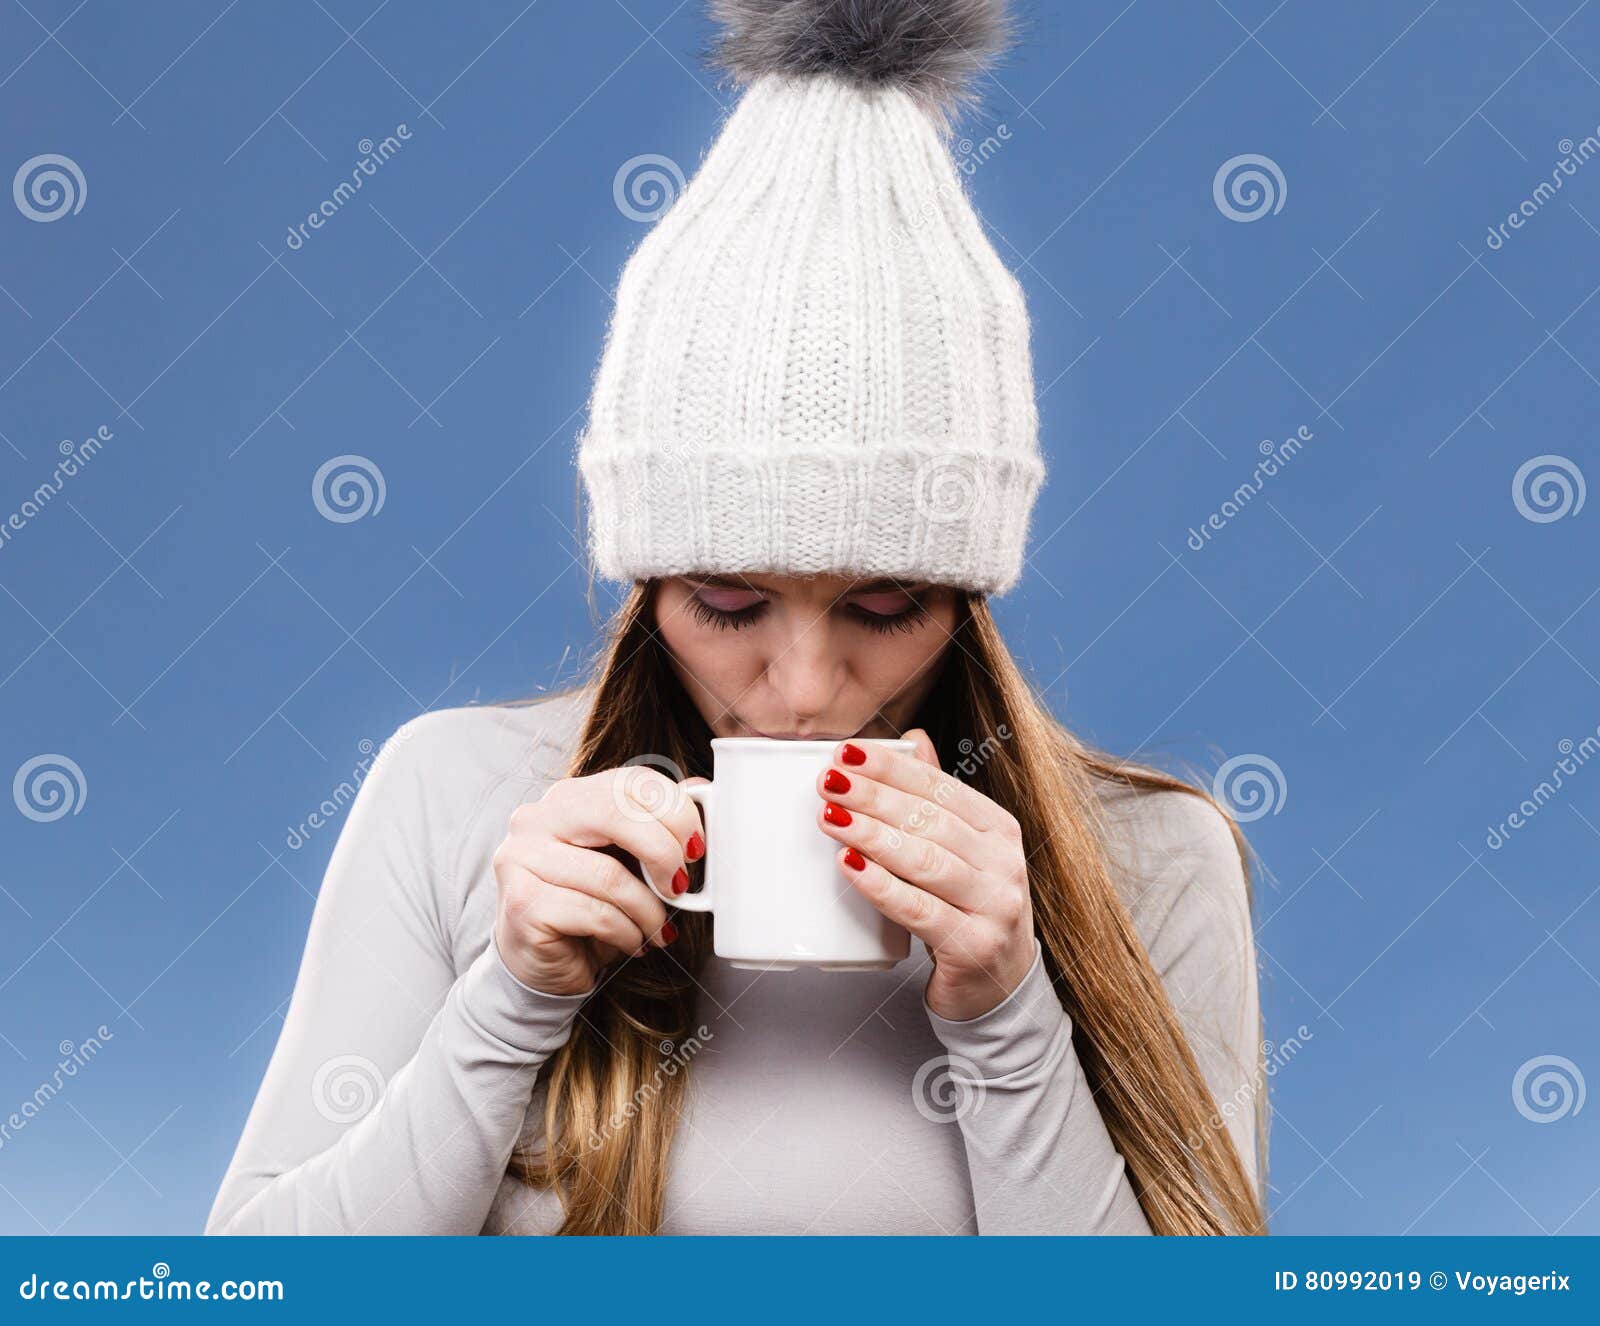 Girl in Thermal Underwear Drinking Tea Stock Image - Image of sporty ...